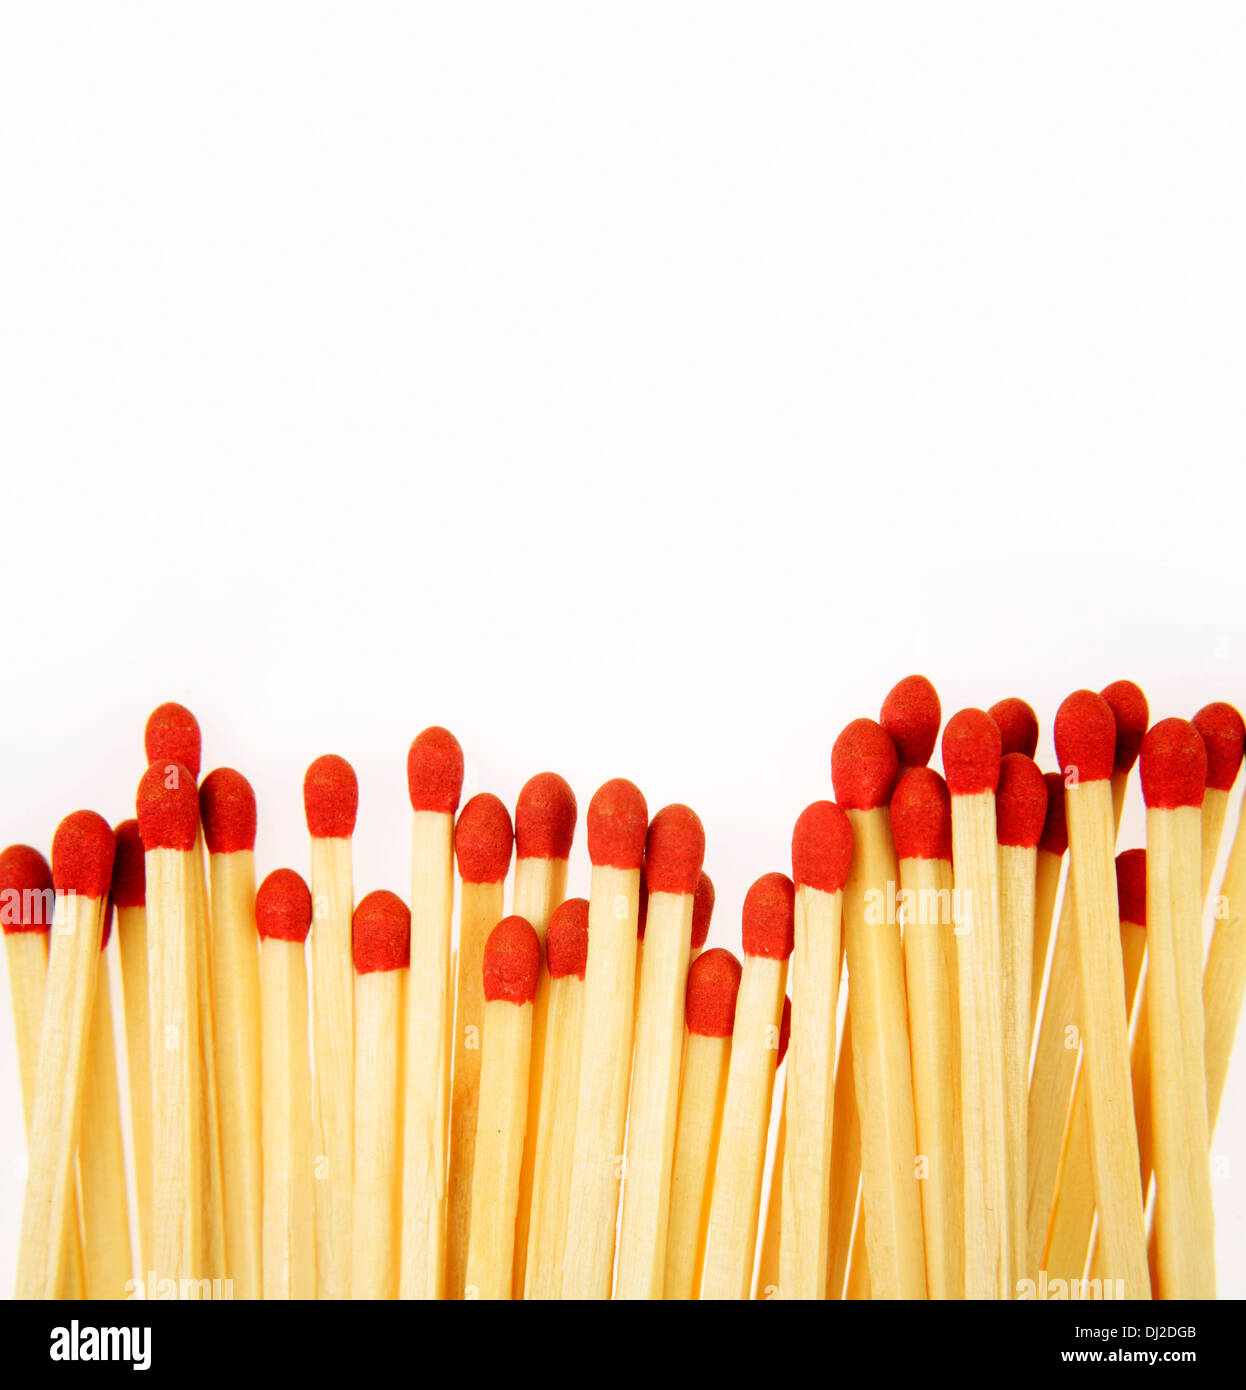 Pile of matchsticks on white Stock Photo